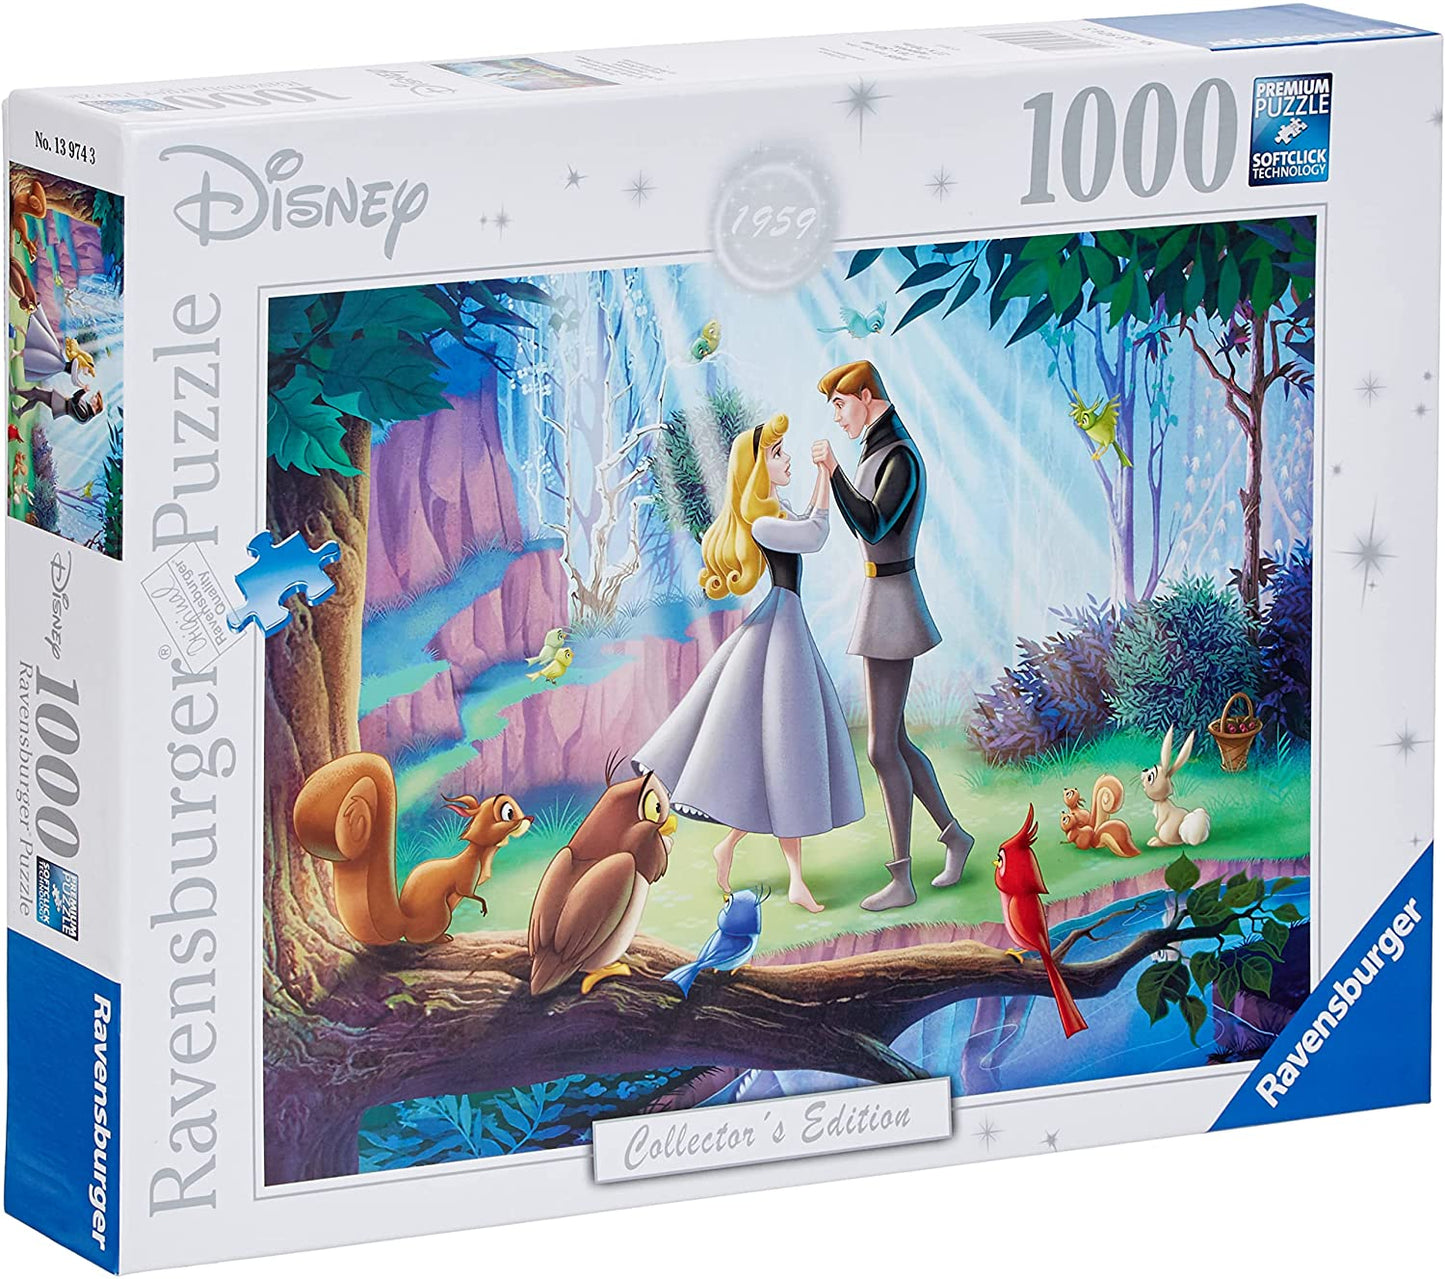 Sleeping Beauty by Disney Collector's Edition, 1000 Piece Puzzle